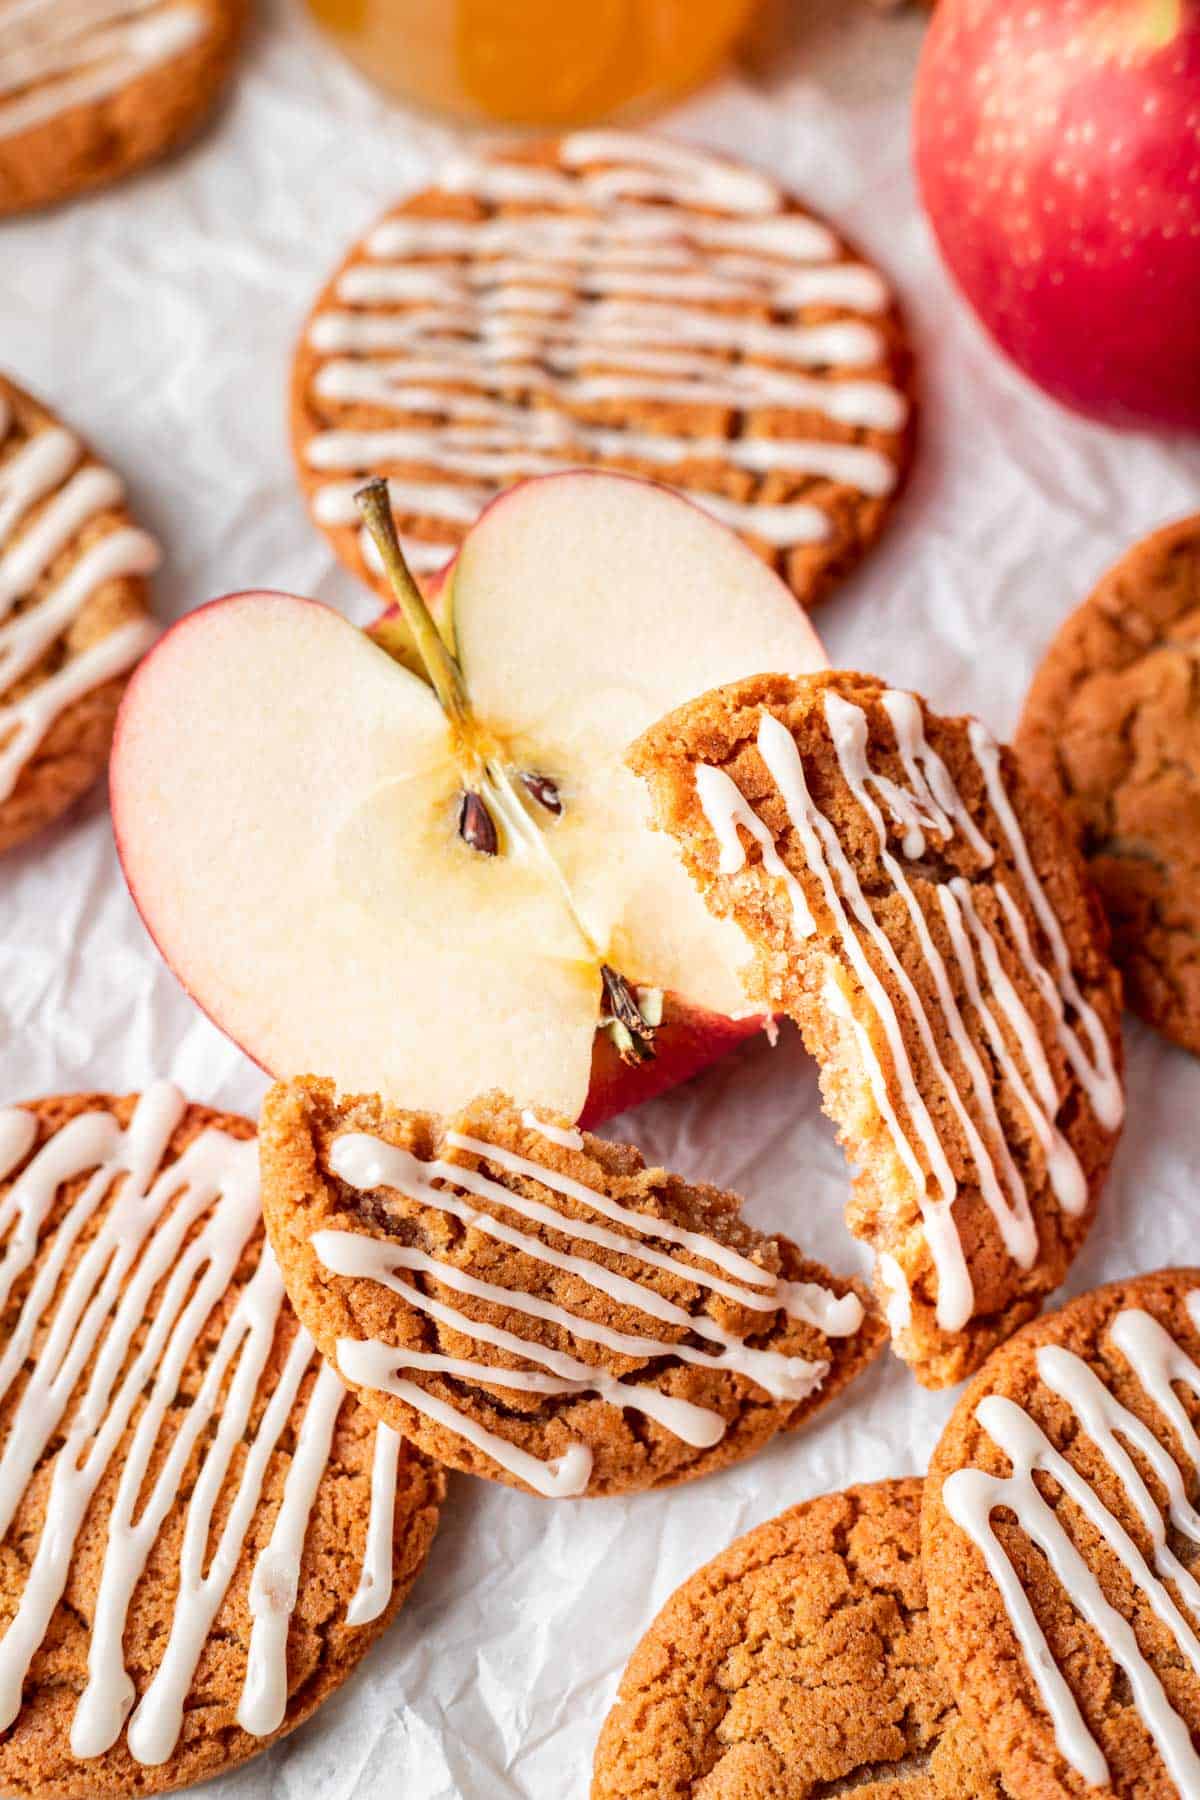 An apple cider cookie broken in half surrounded by apples.